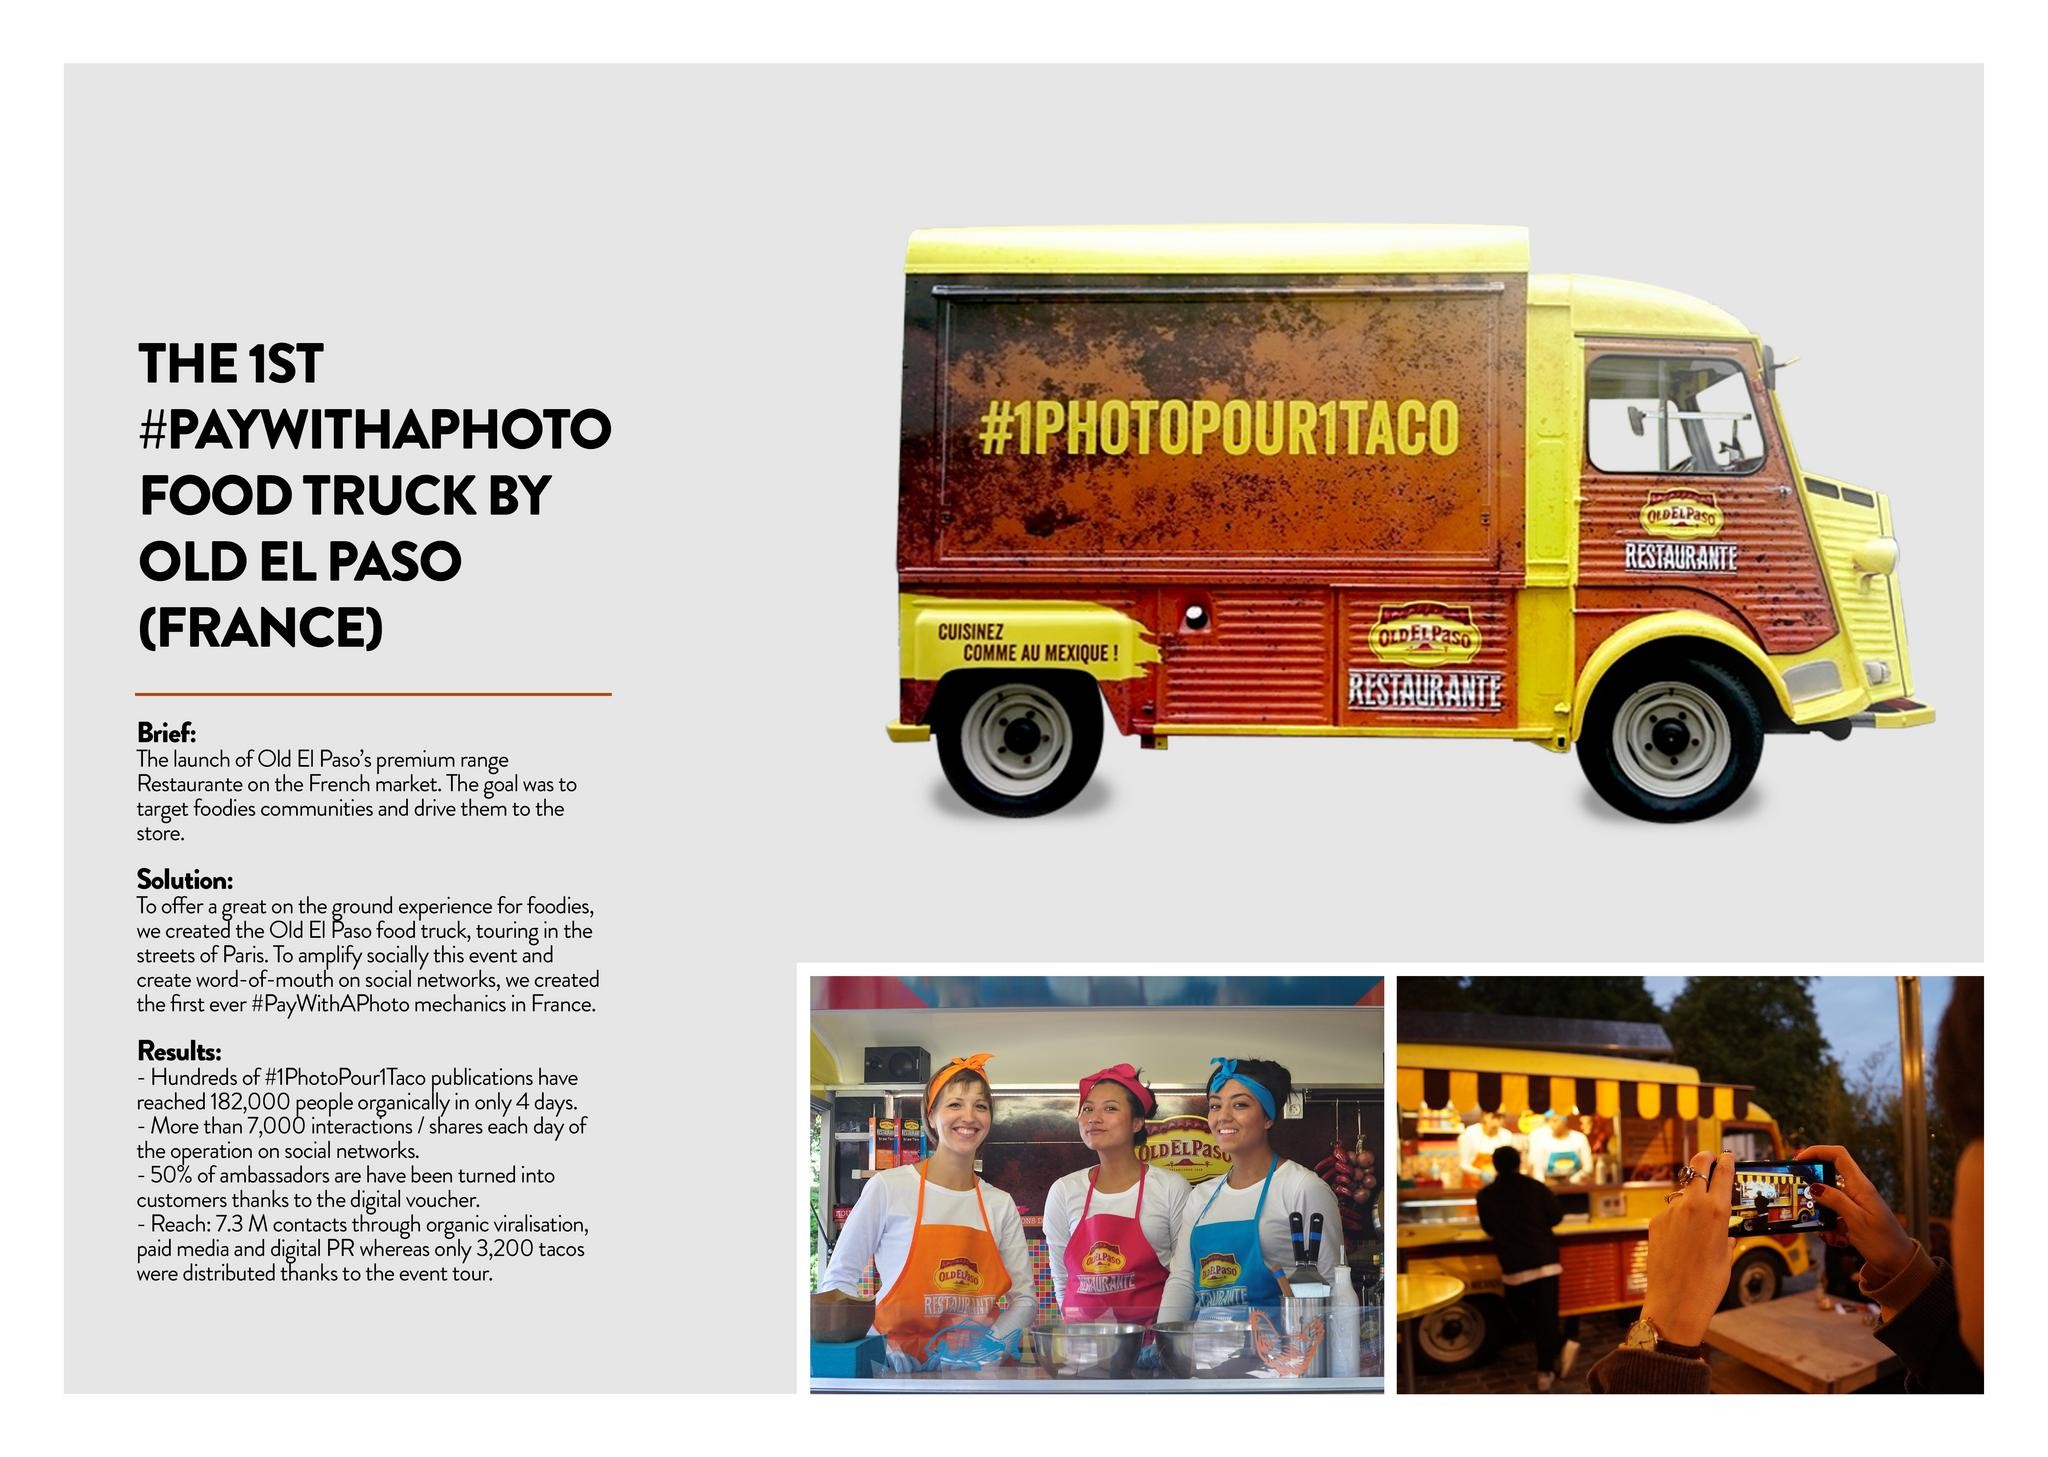 THE 1ST #PAYWITHAPHOTO FOOD TRUCK BY OLD EL PASO (FRANCE)